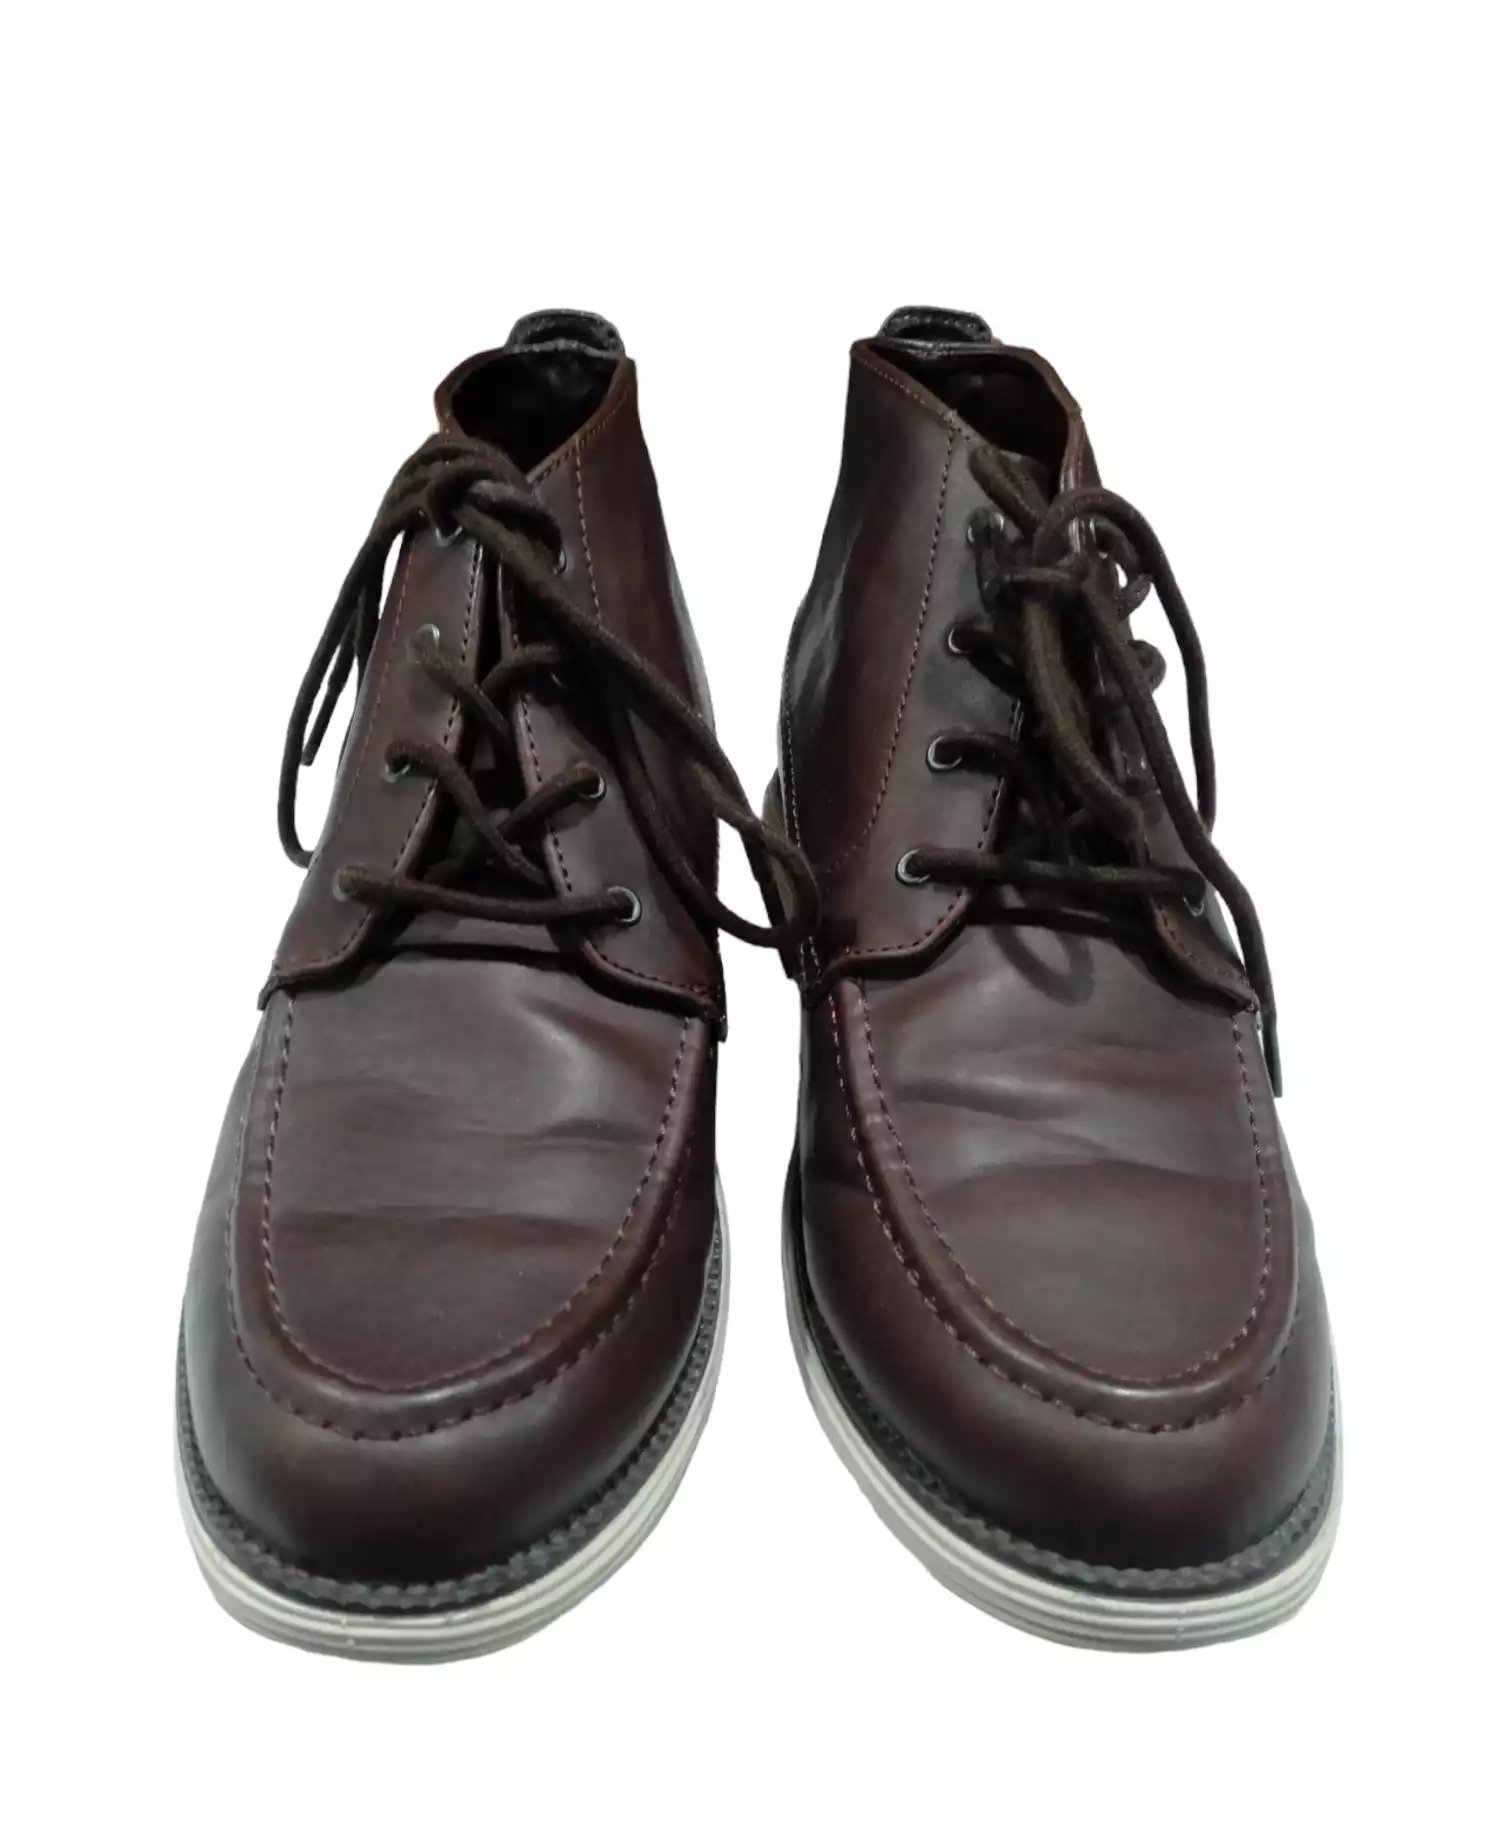 Shoes by Cole Haan